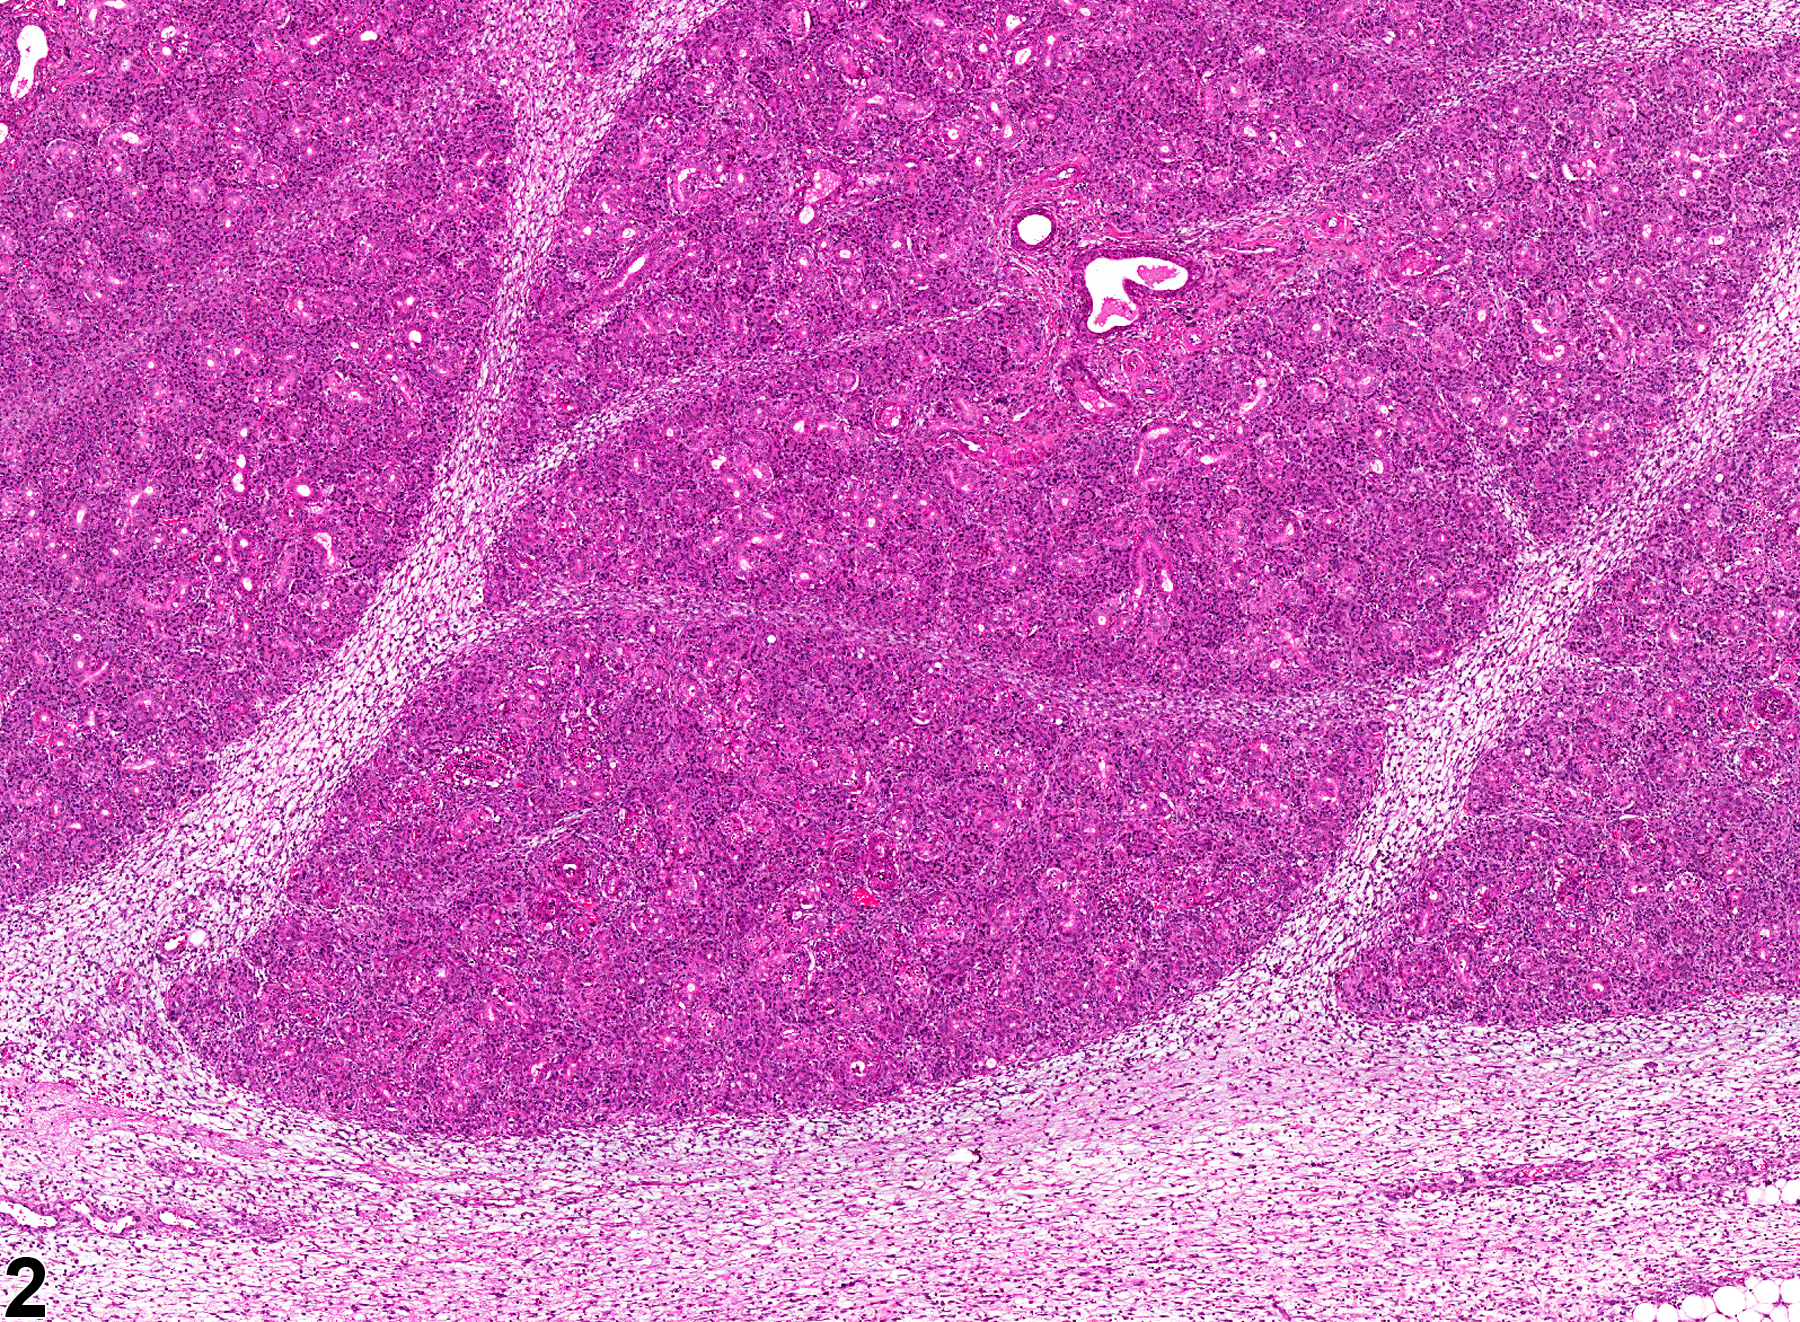 Image of fibrosis in the salivary gland from a male F344/N rat in a subchronic study